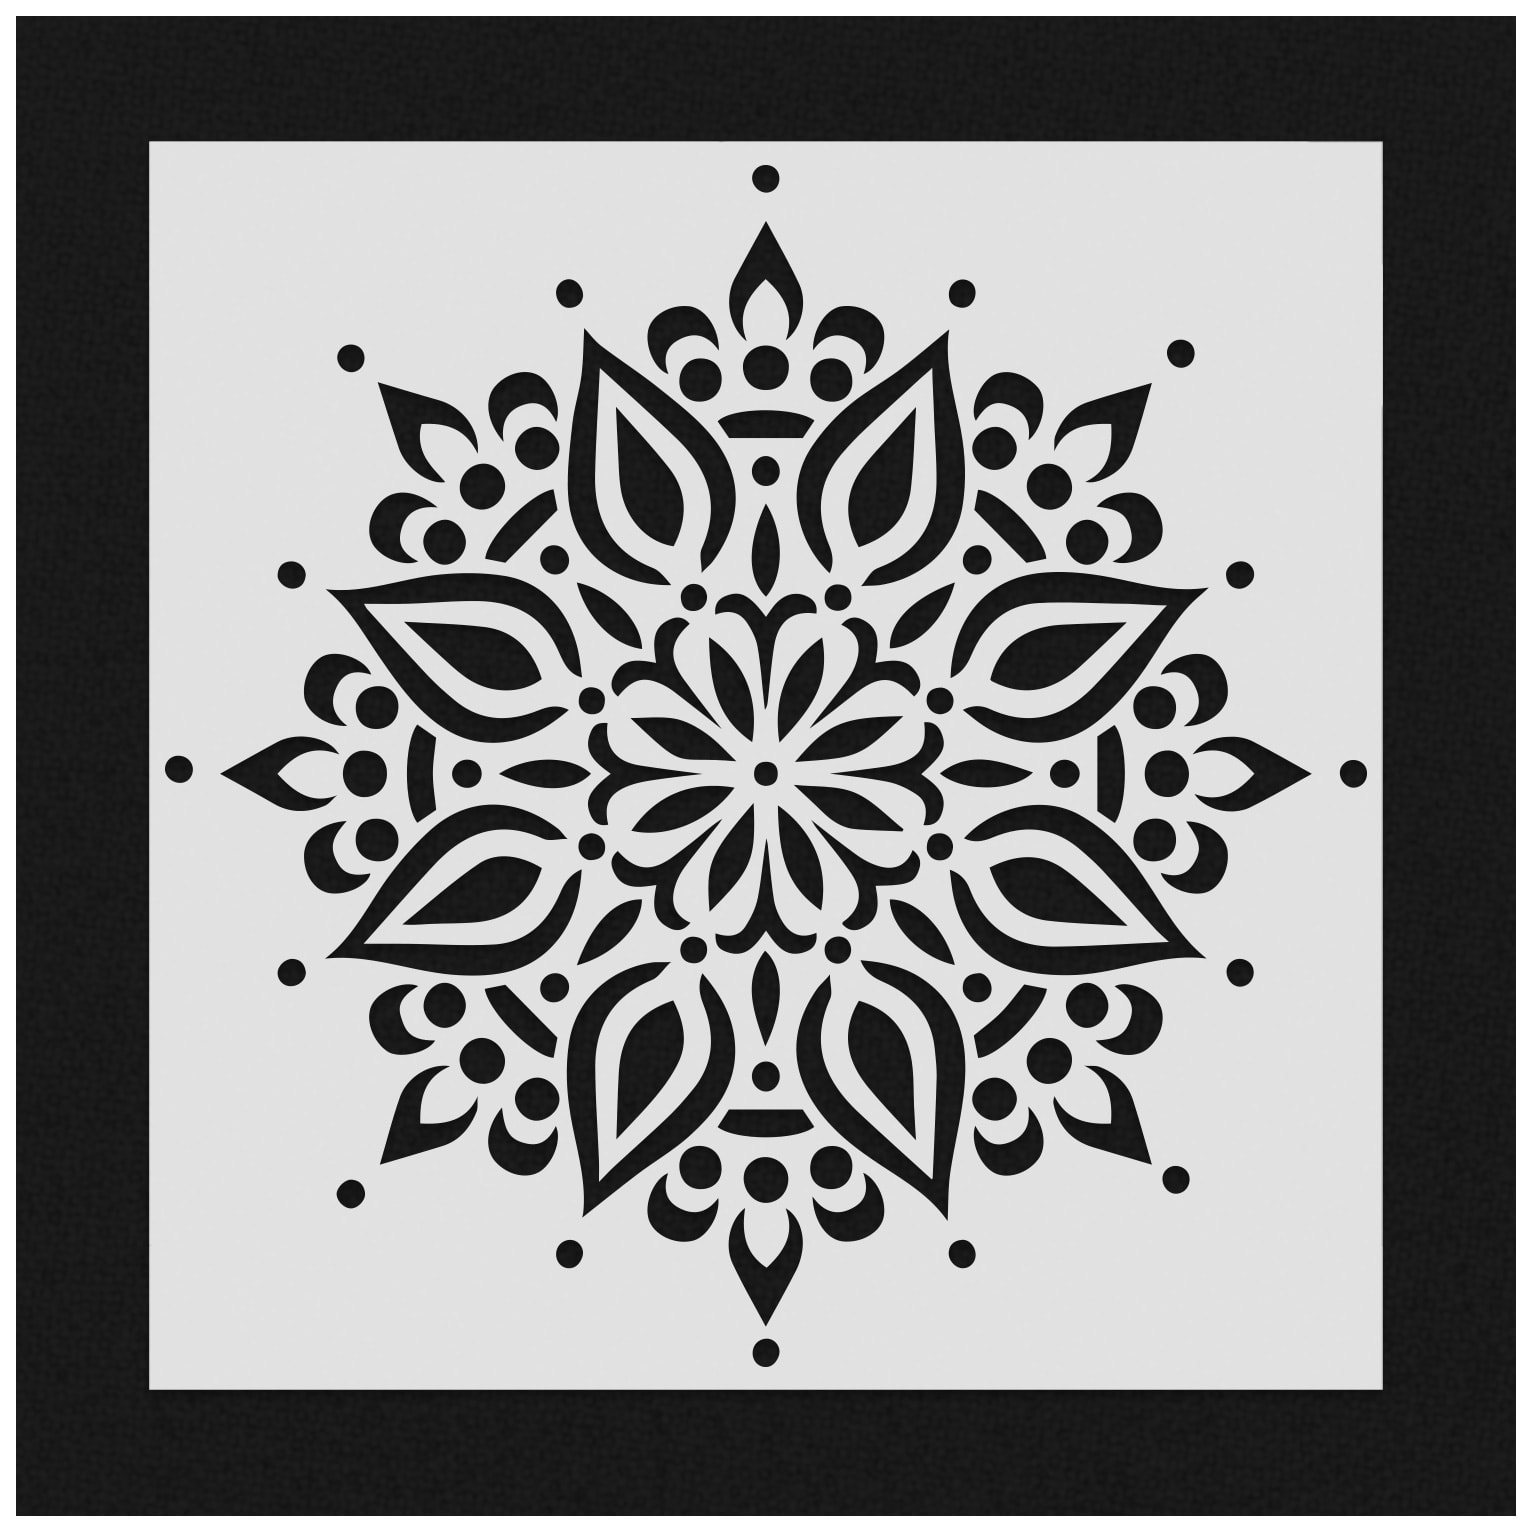 Free Stencil Maker stencil. Print, customize, or make your own free at  RapidResizer.com #stencils #…